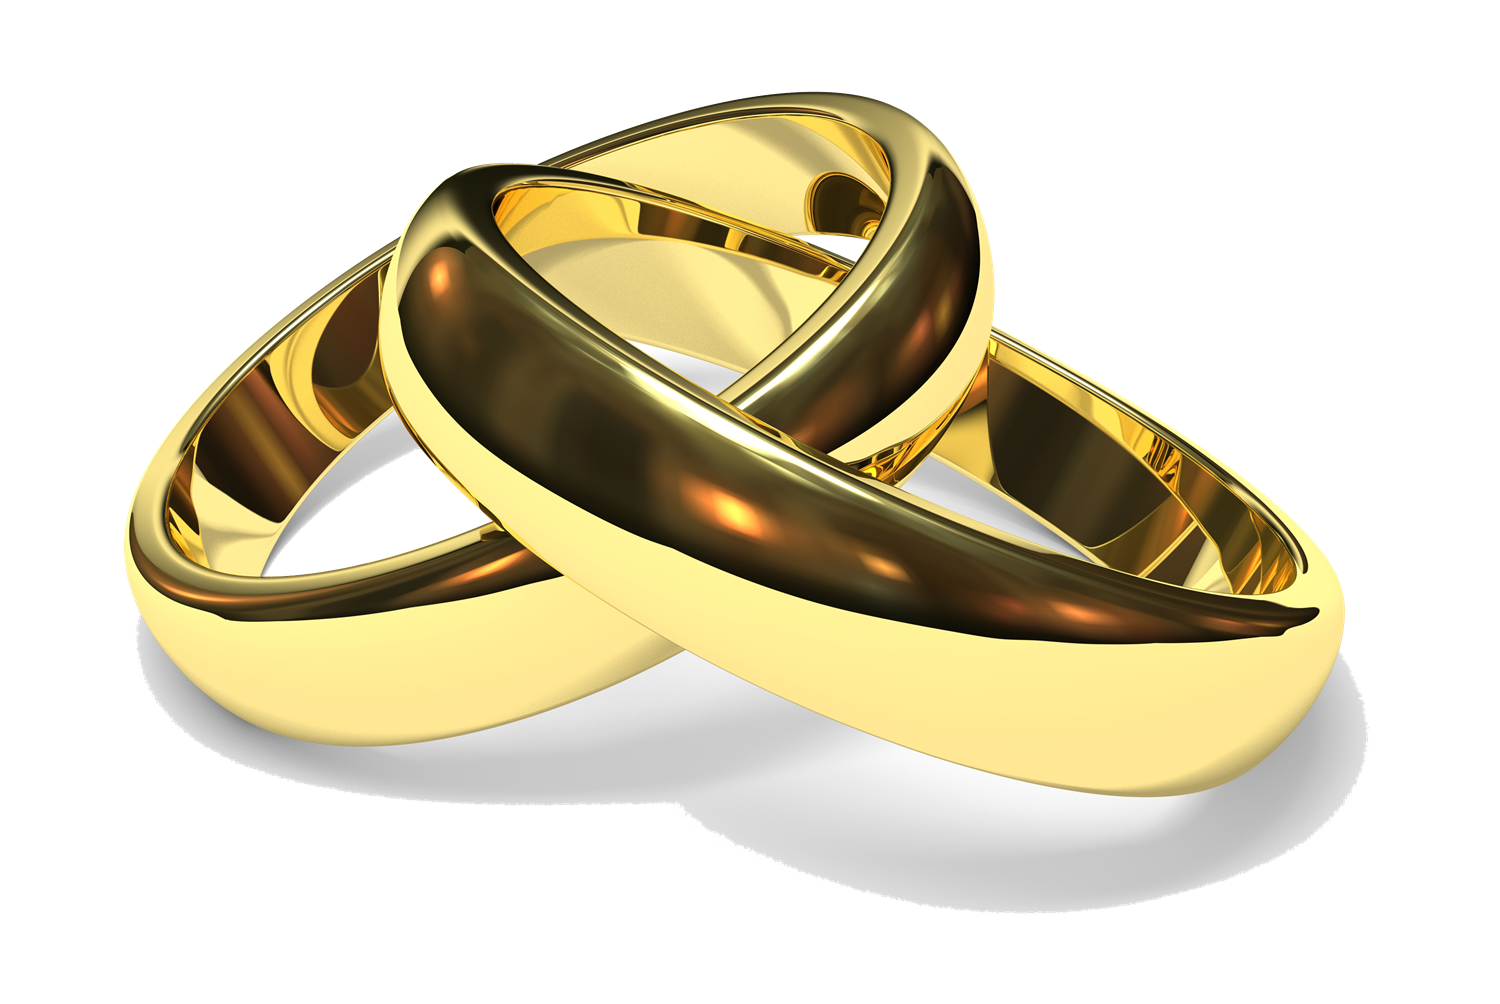 Jewelry ring PNG images free download